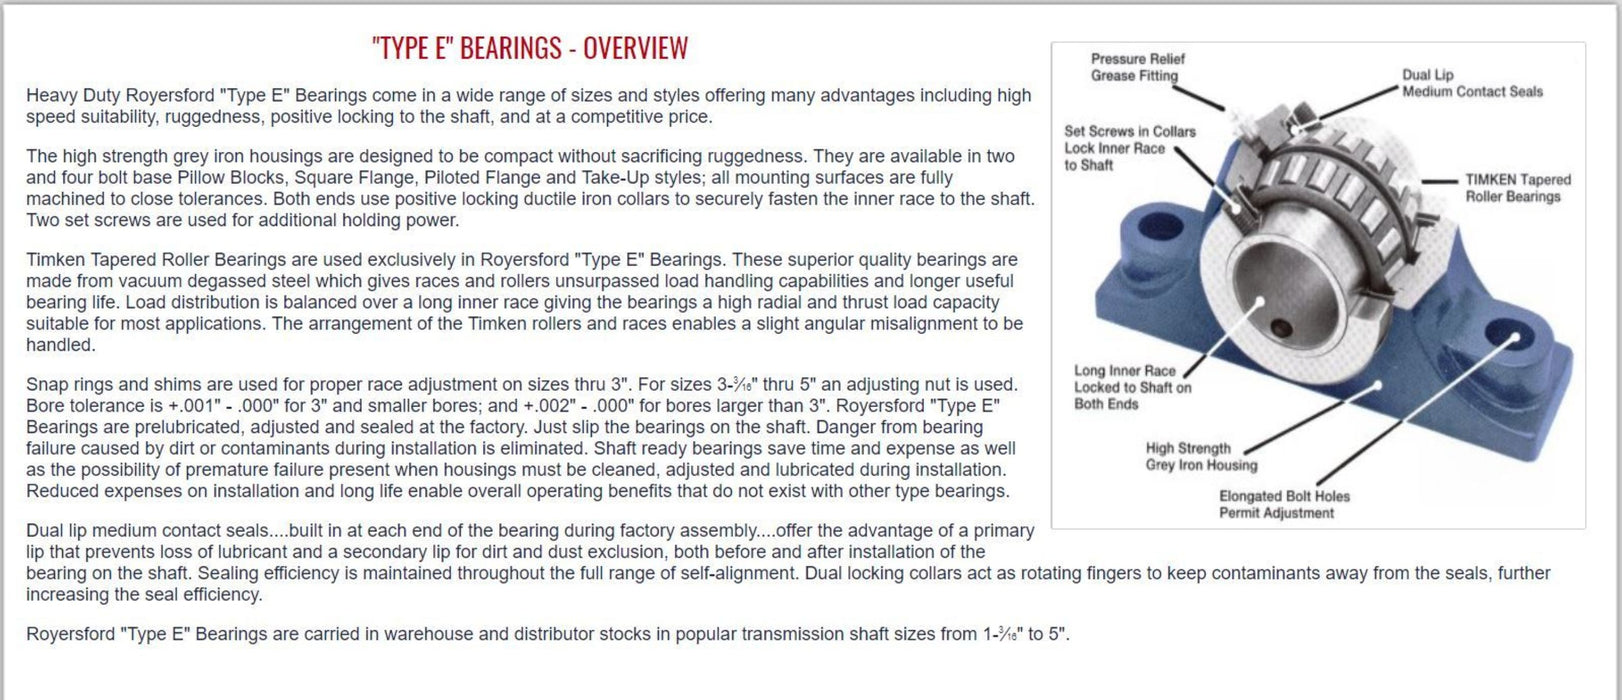 20-05-0106, Royersford Type E 4 Bolt Square Flange Bearing, 1-3/8" with Timken Tapered Roller Bearings